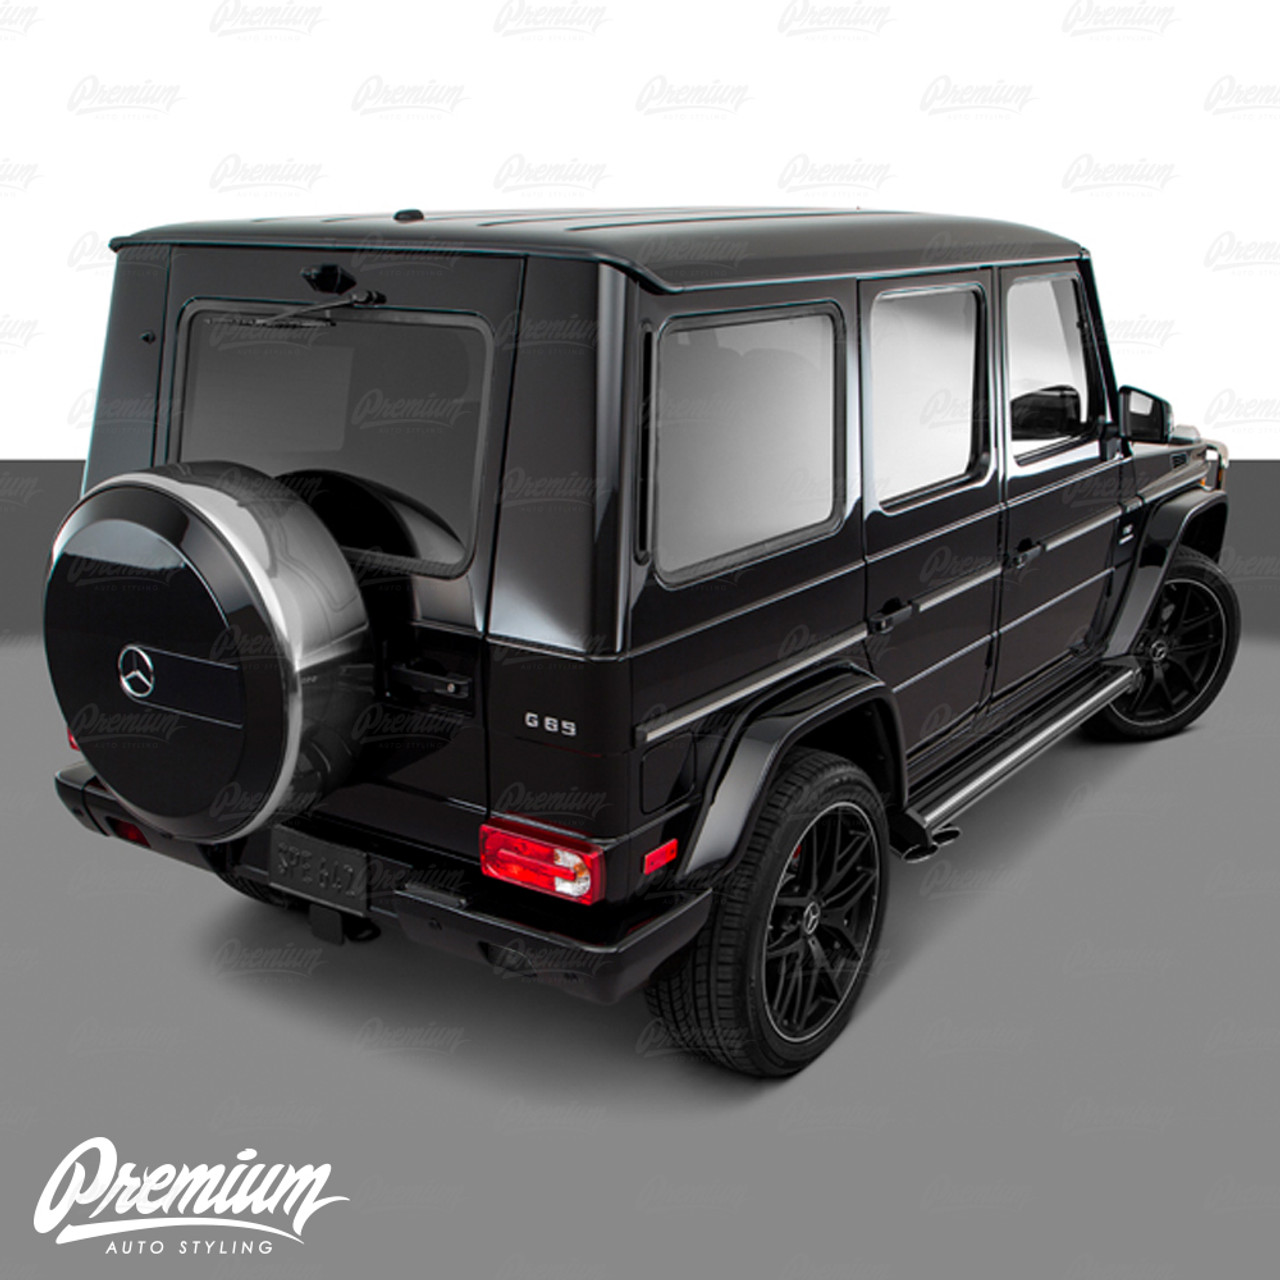 Rear Reflector And Reverse Light Overlay Smoke Tint 18 Mercedes G Wagon G Class Amg63 Premium Auto Styling